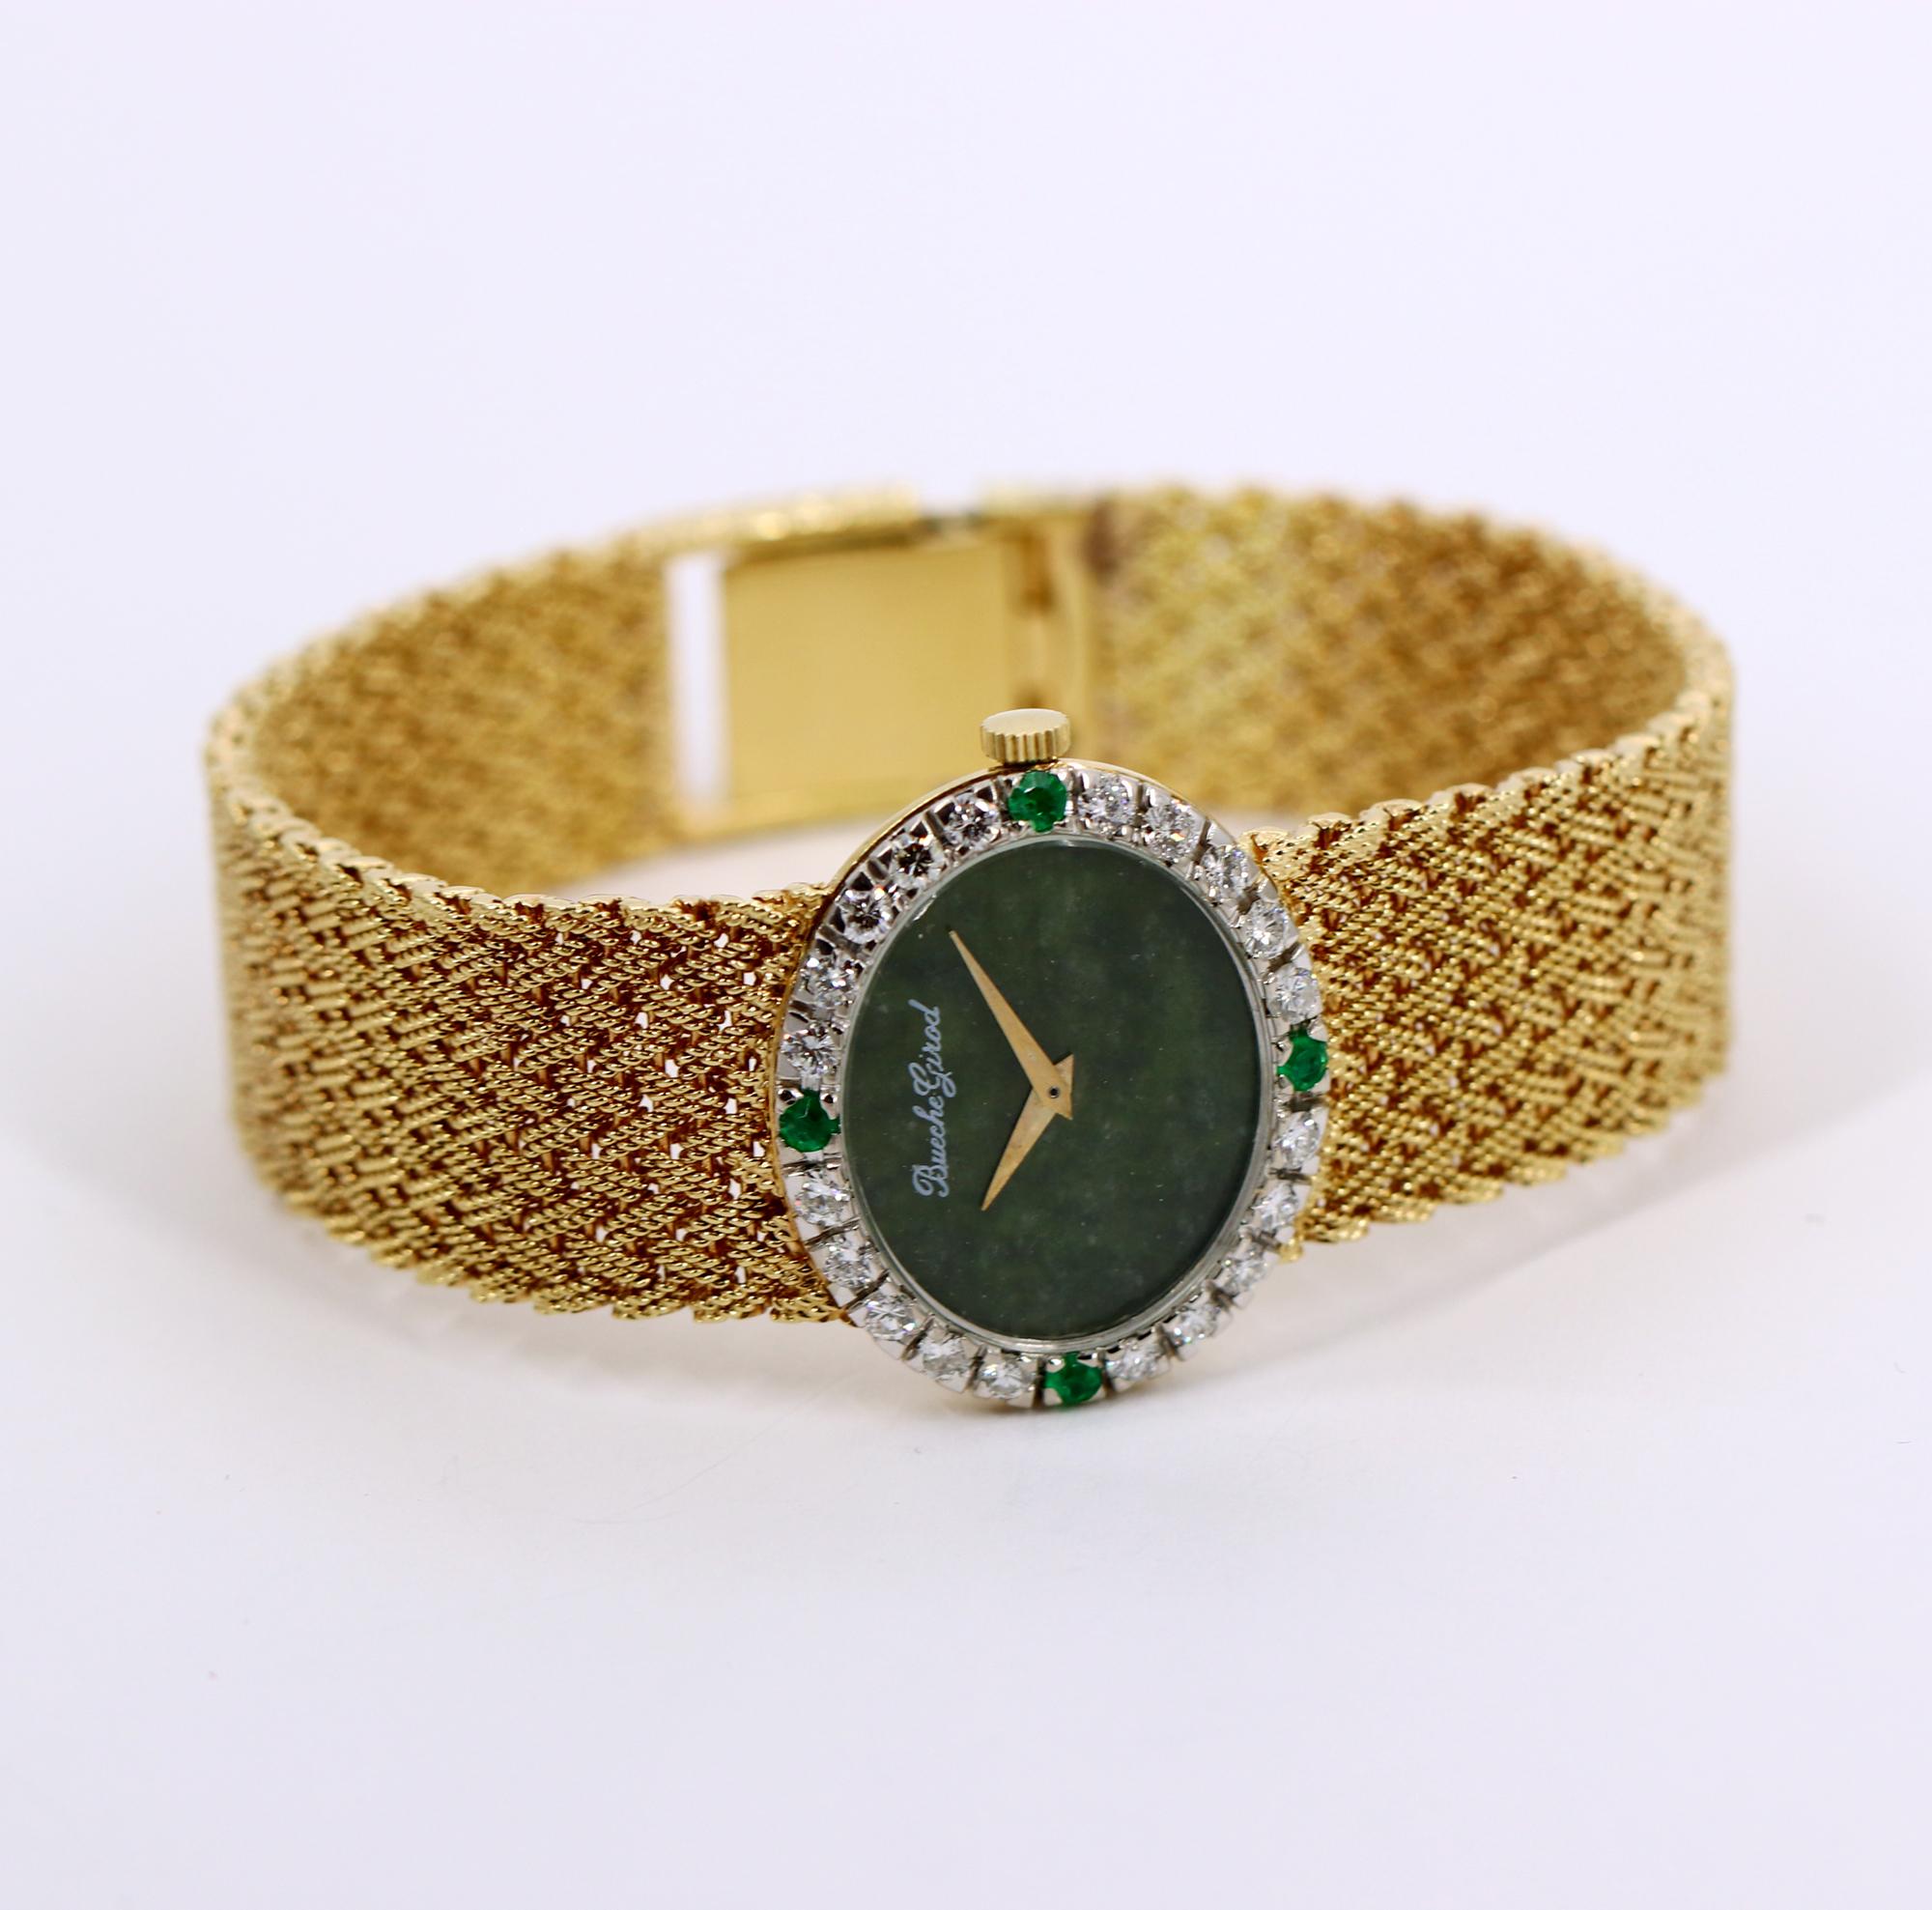 Ladies Gold Beuche Girod Watch with Diamond and Emerald Bezel and Jade Dial 1